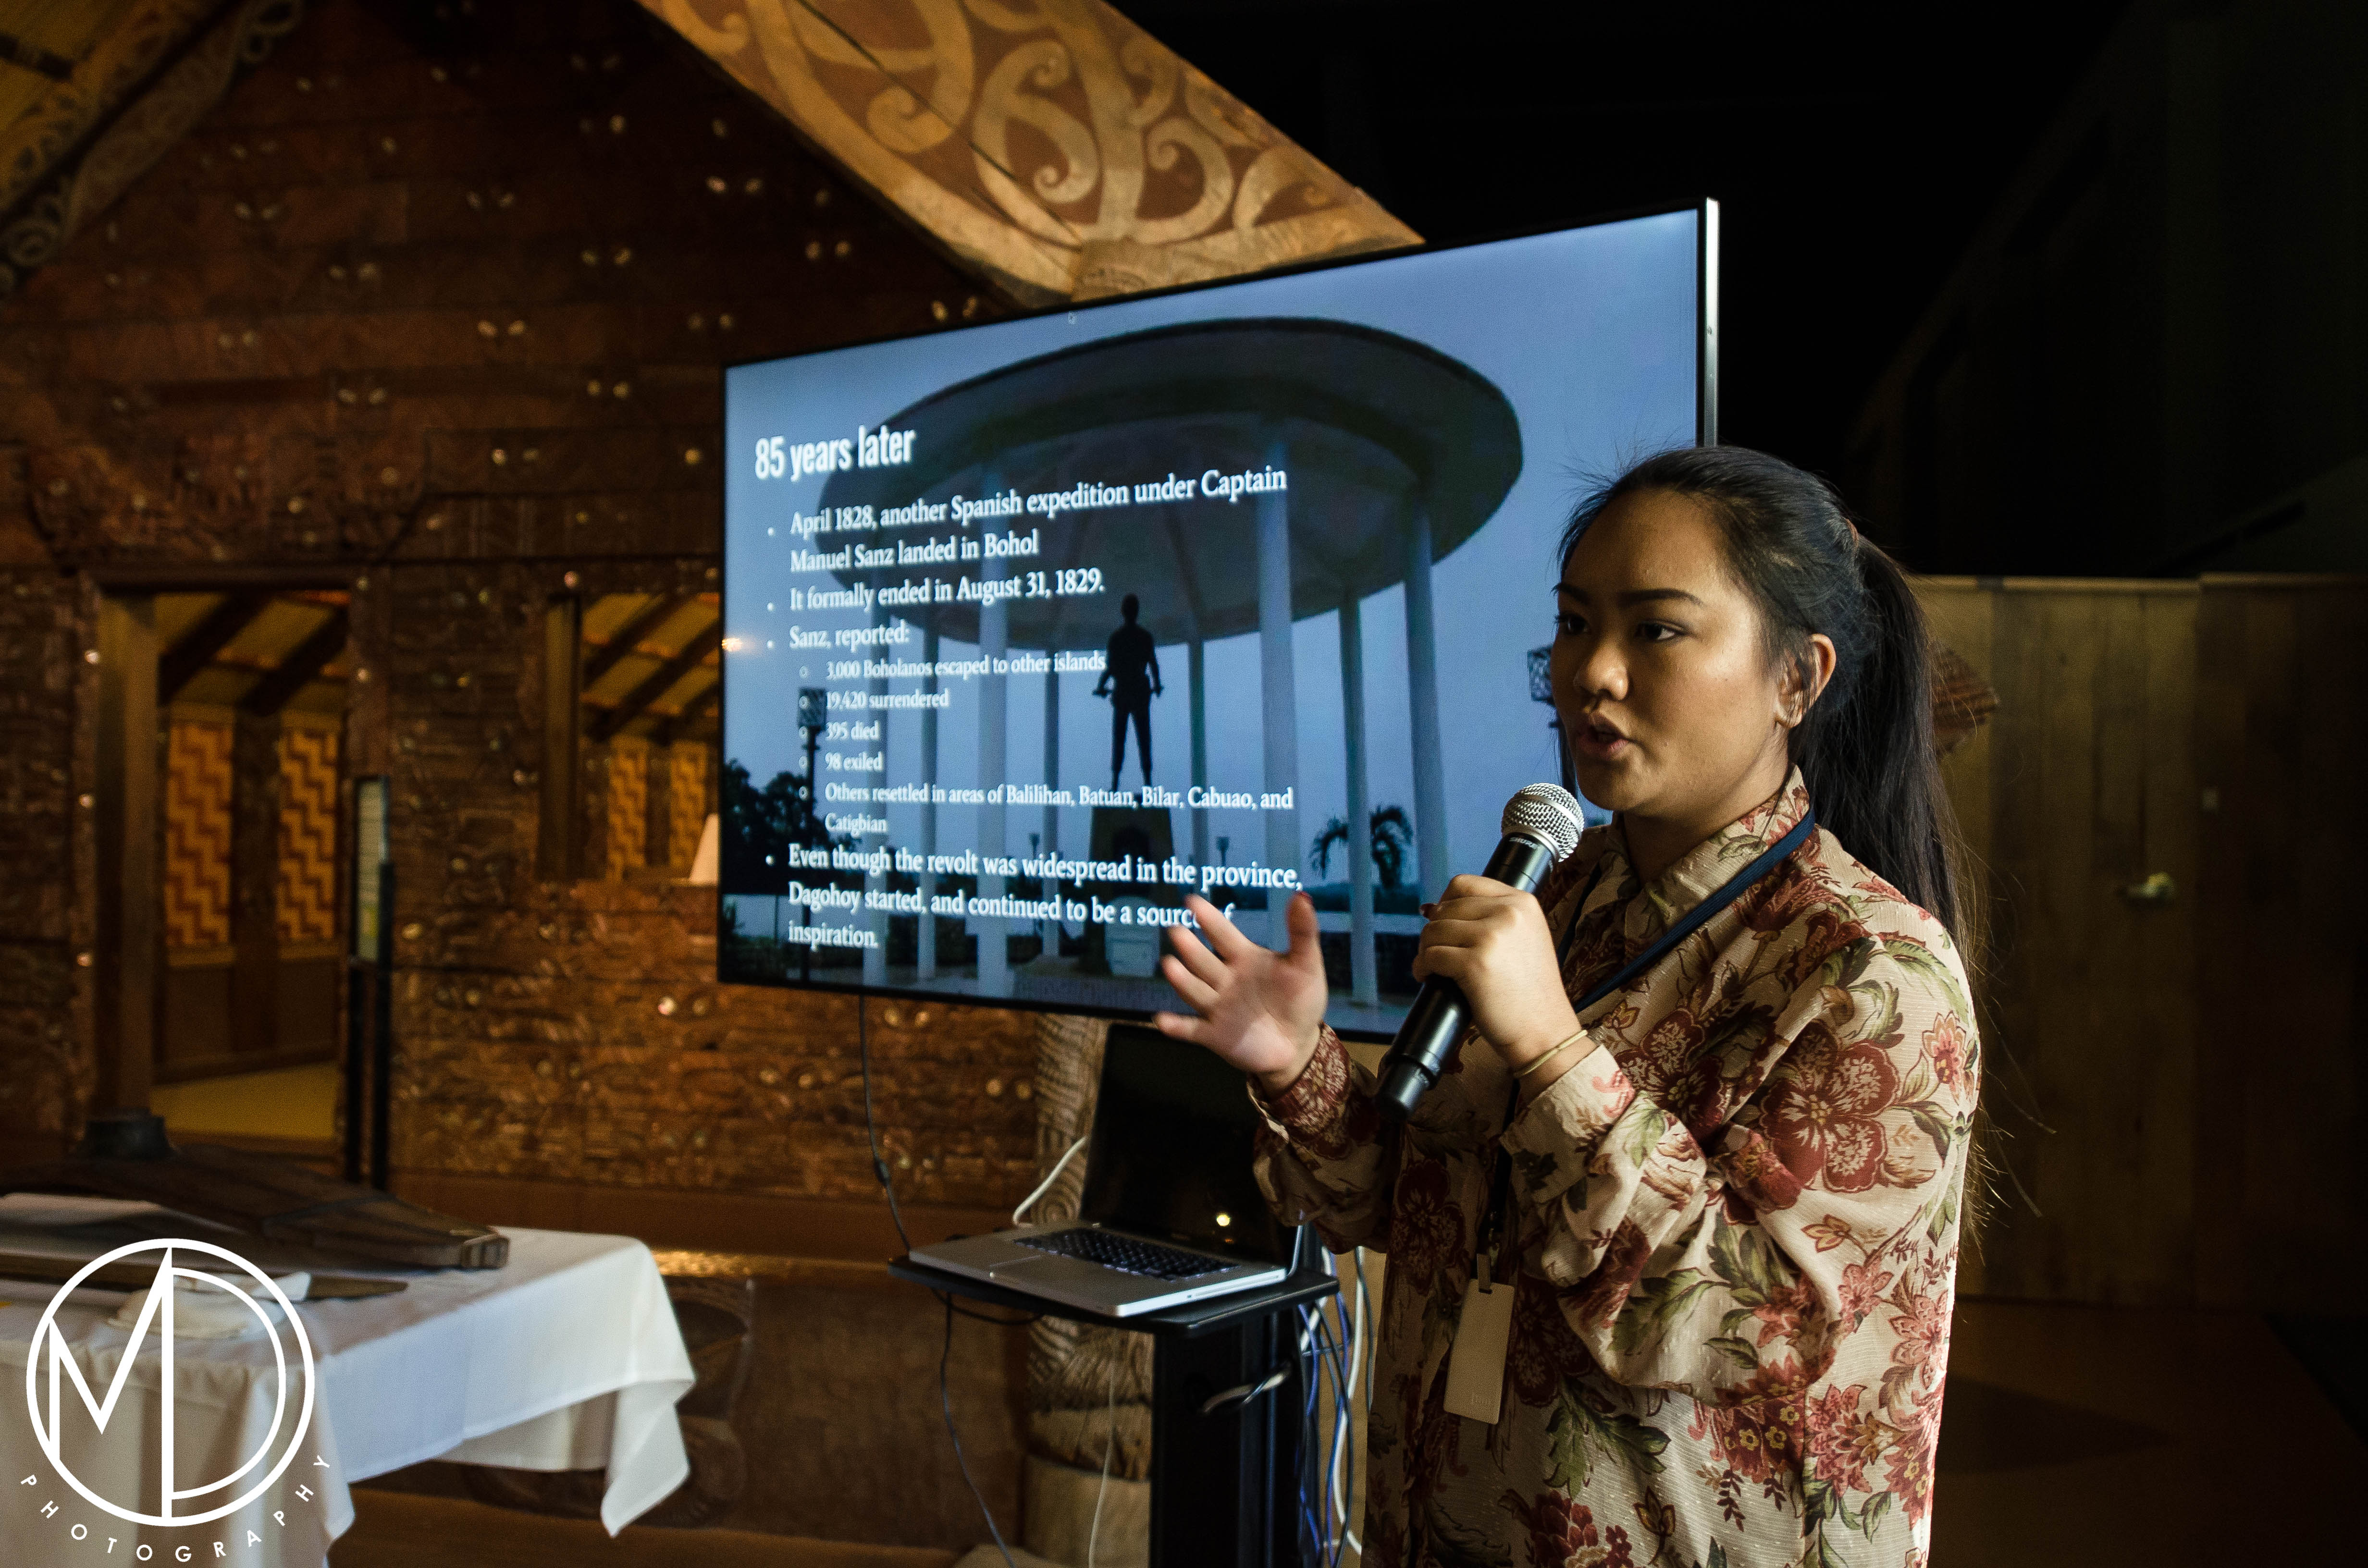 Alpha Sadcopen during her presentation on the Dagohoy Rebellion (c) Field Museum of Natural History - CC BY-NC 4.0